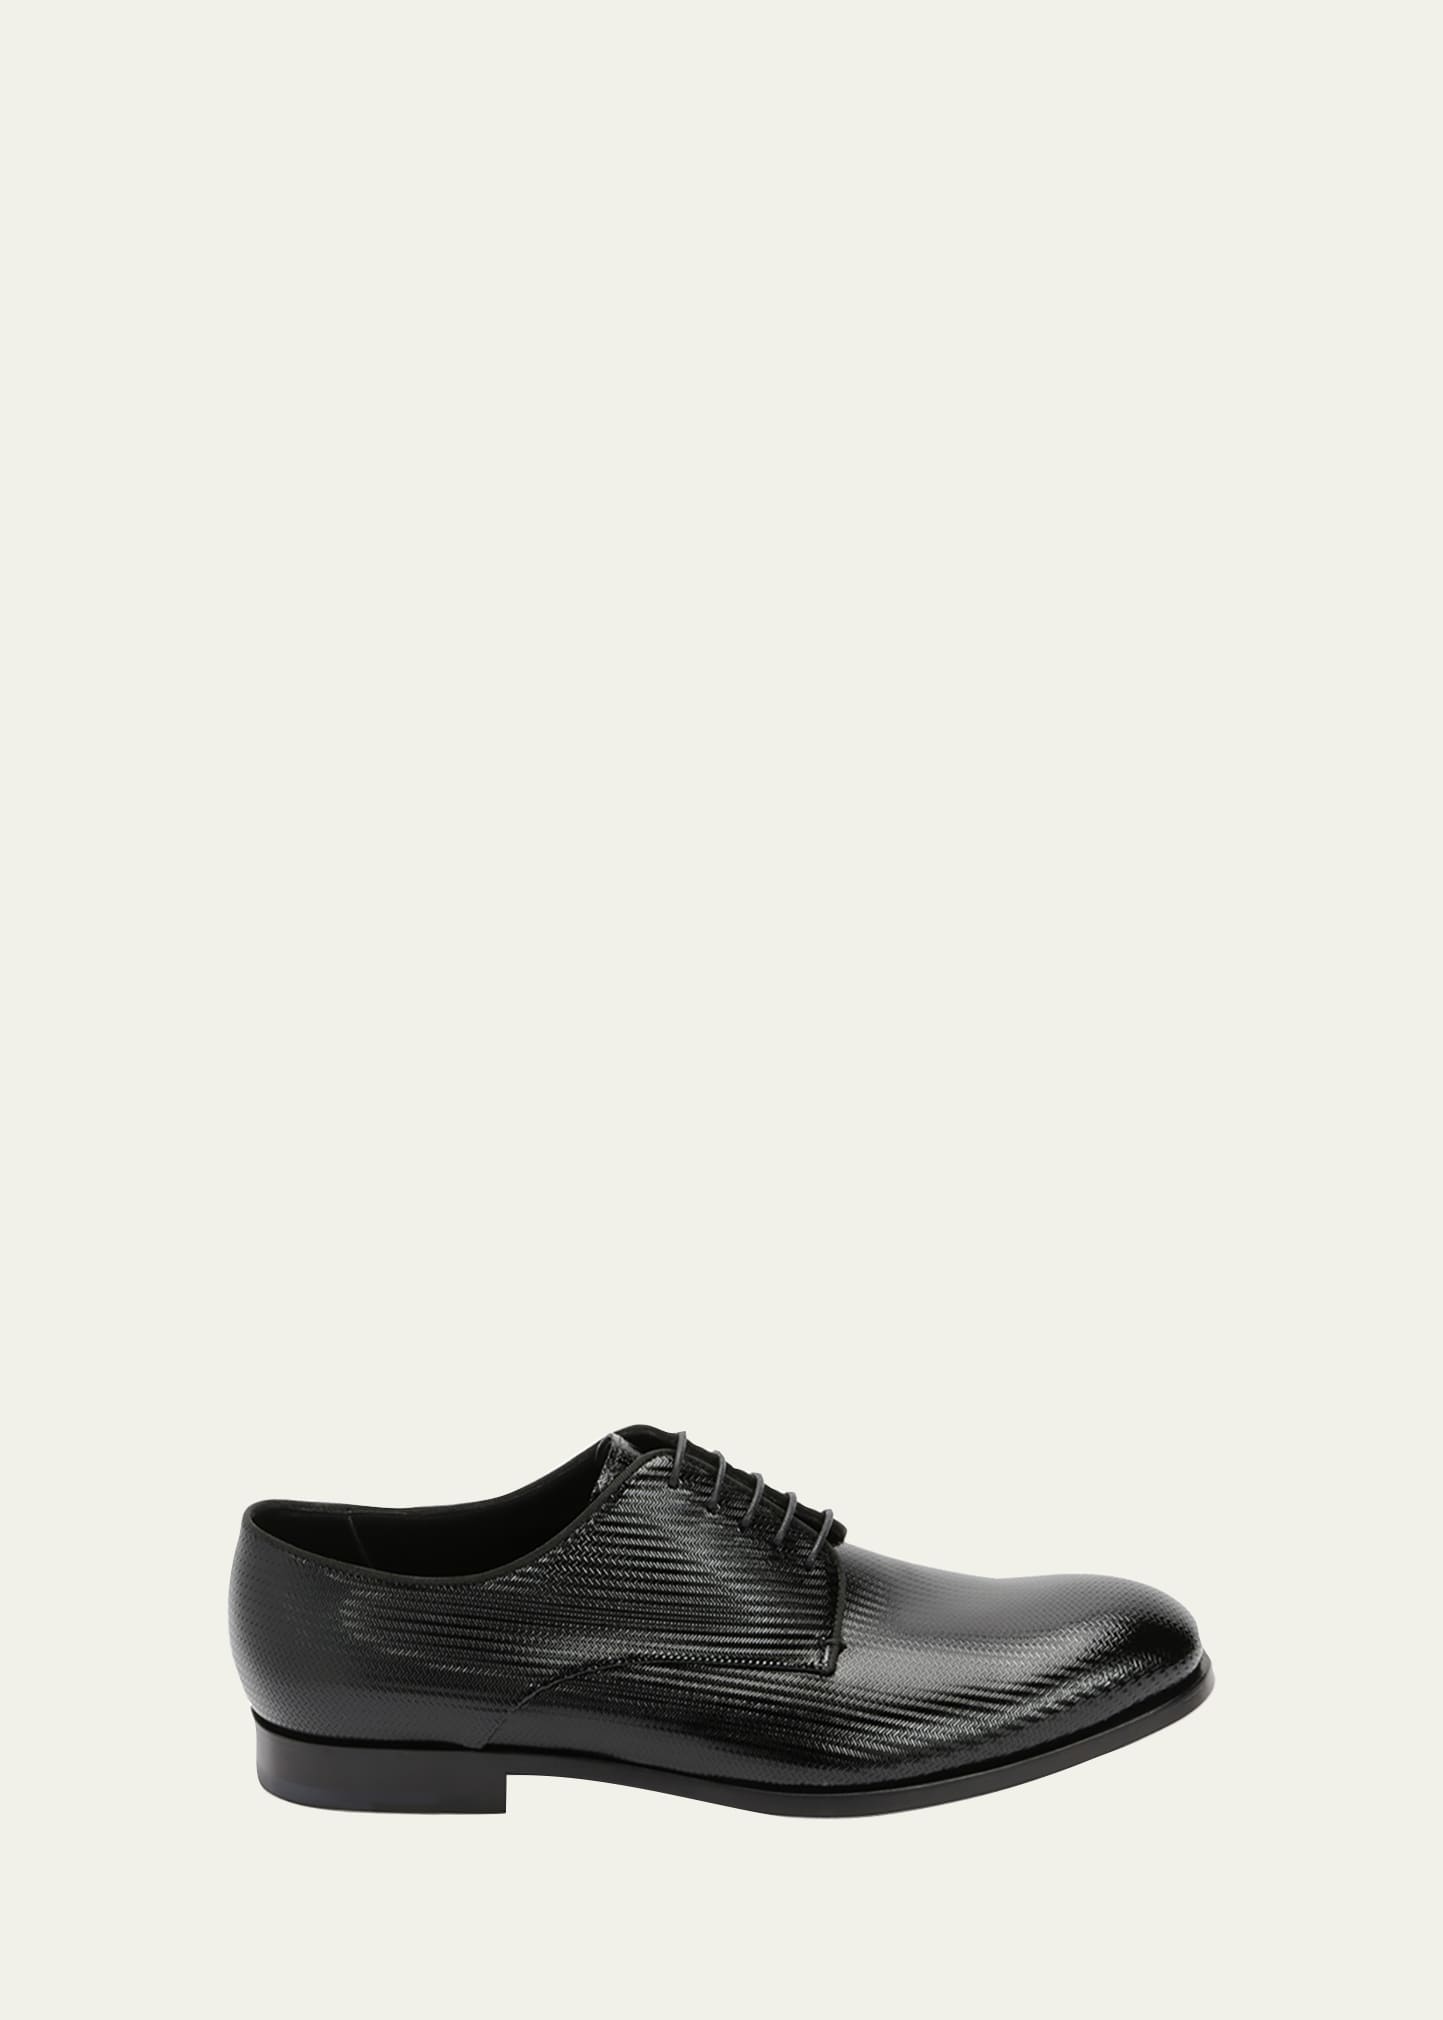 insect Opgewonden zijn Telemacos Giorgio Armani Men's Formal Patent Chevron Leather Lace-Up Shoe - Bergdorf  Goodman